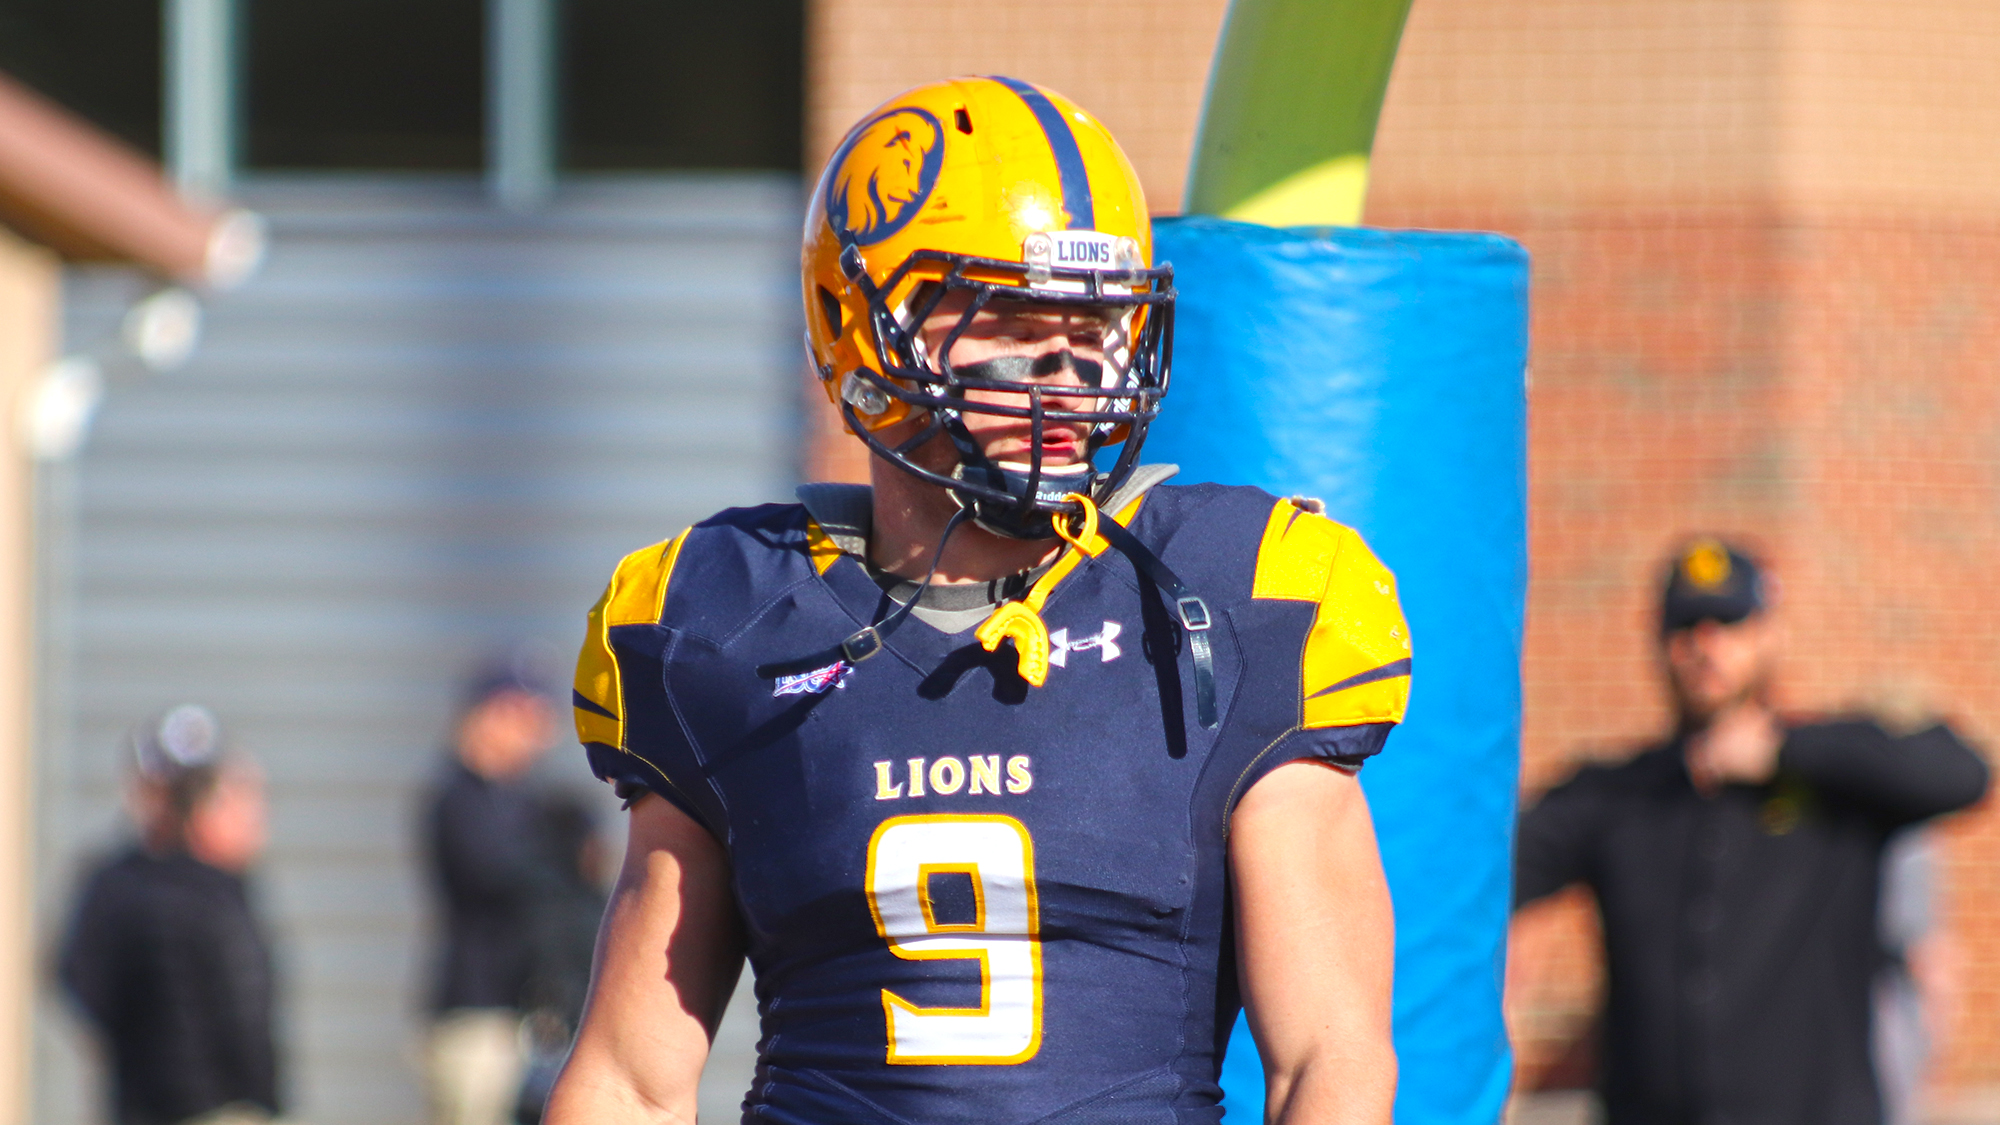 Texas A&M-Commerce Lions ranked No. 5 in College Football America Yearbook preseason poll; Saathoff named to CFAY Starting Lineup